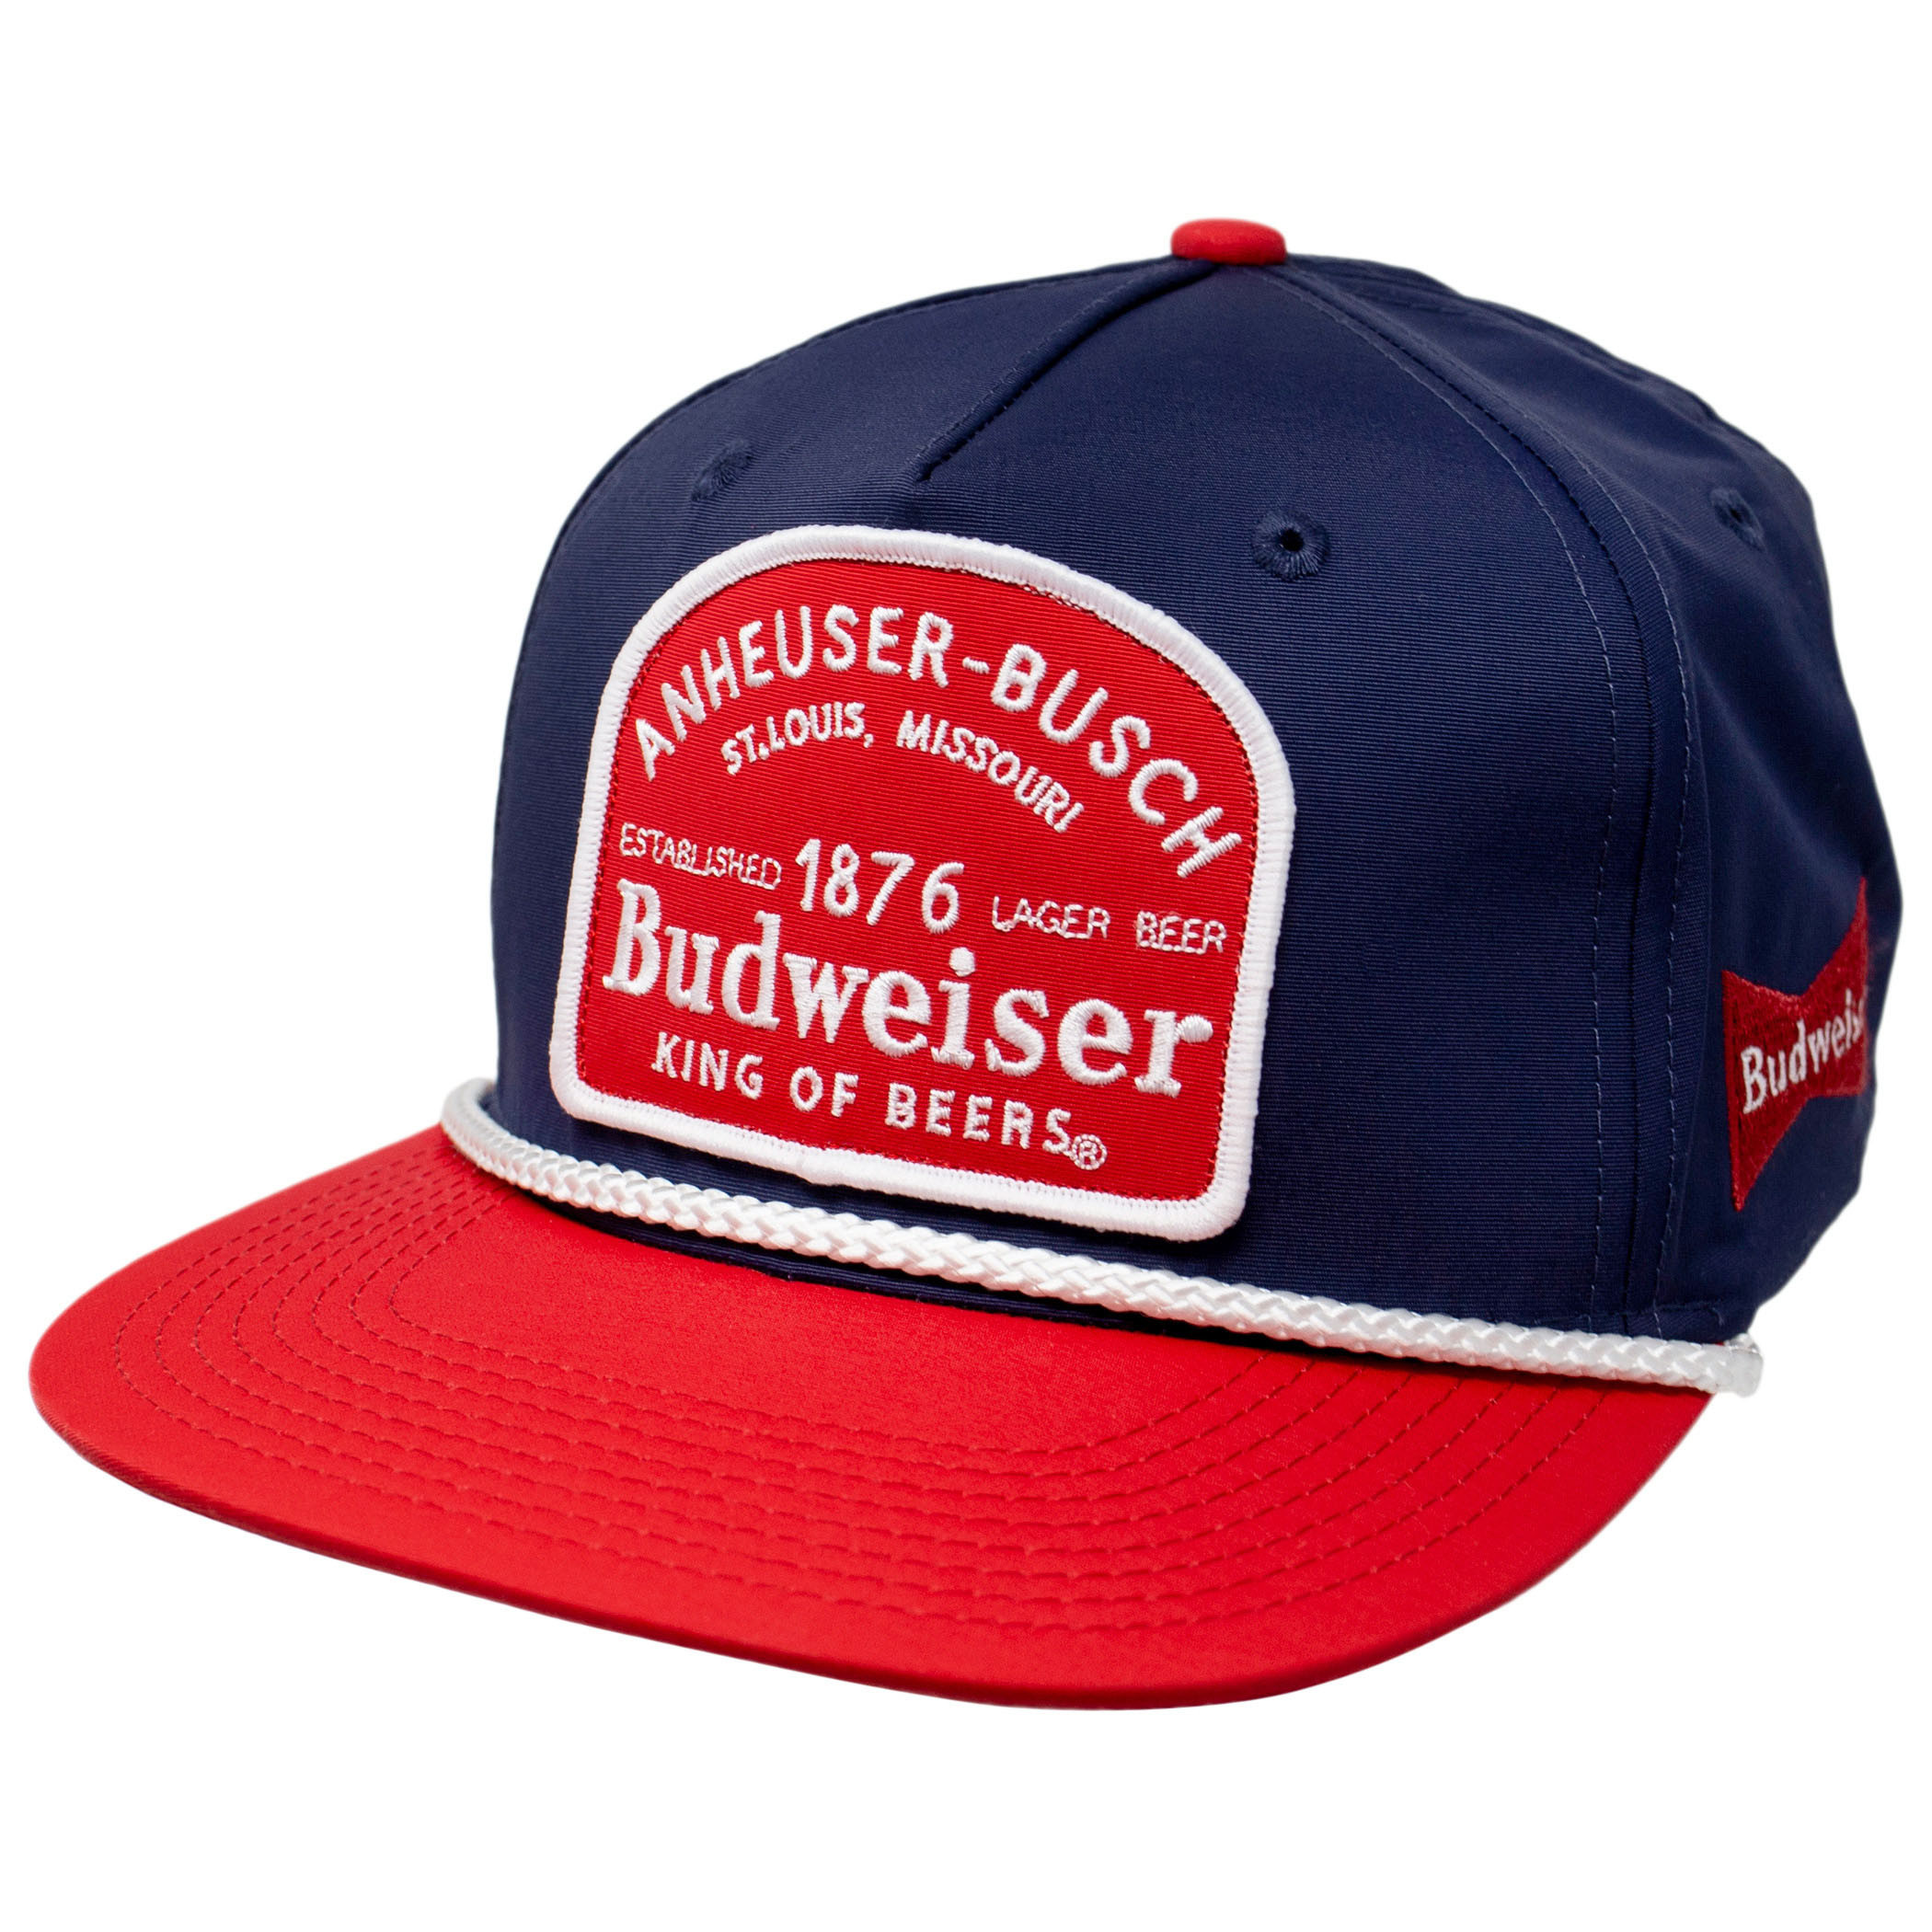 Details about   New Budweiser Baseball Cap Adjustable Hat All Black Official Product from 2003 